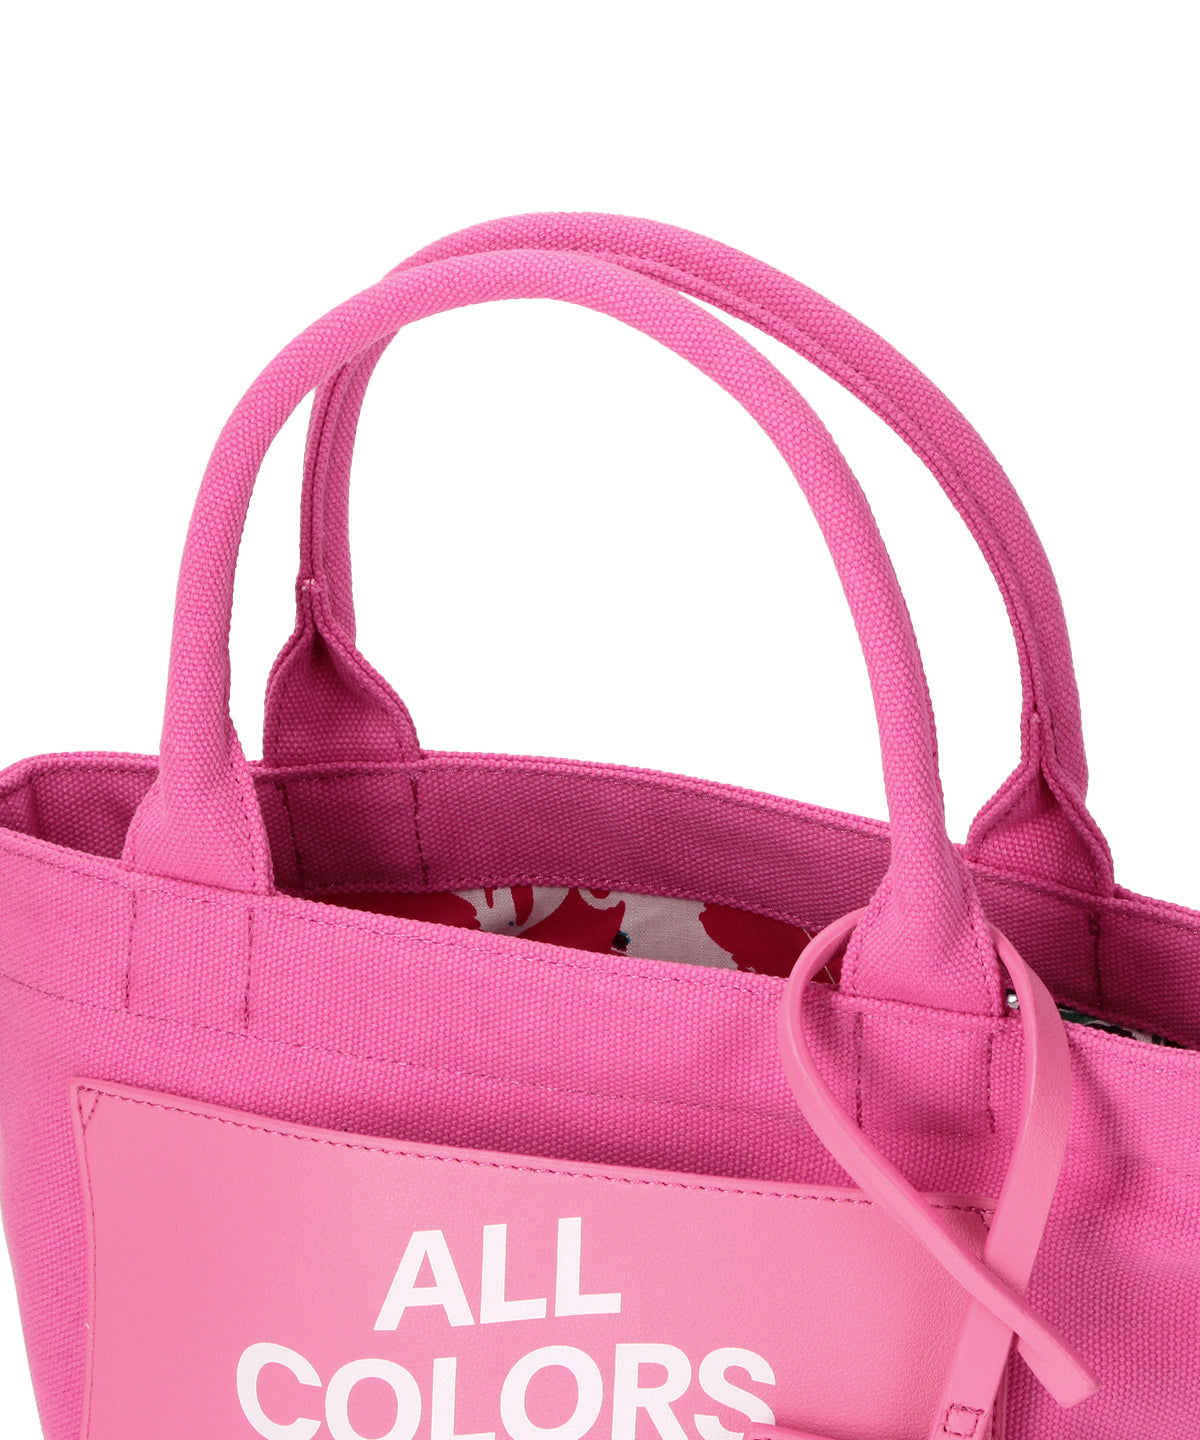 Colored Canvas Tote (Small) PINK